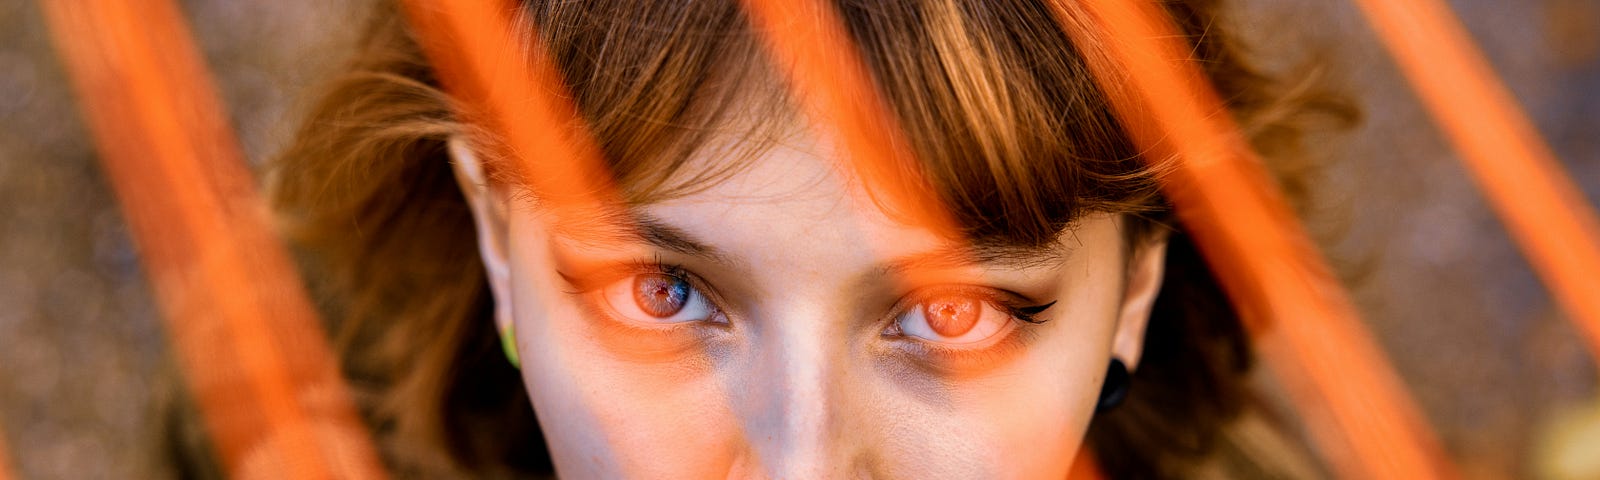 Photo of auburn haired girl’s face with bright orange flashes of light in front of her.